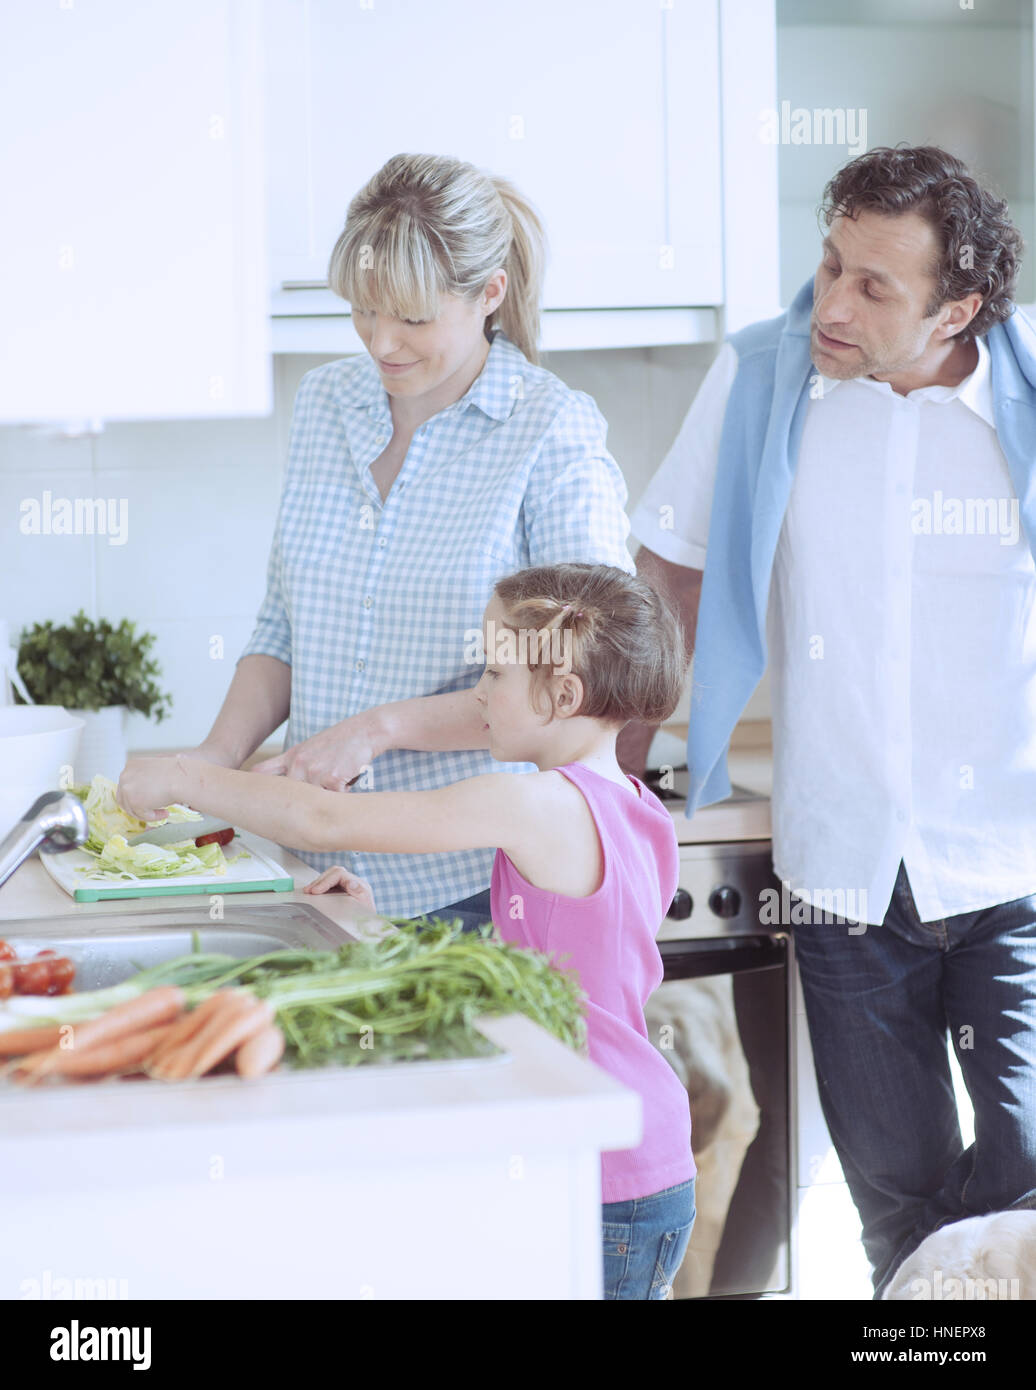 Family making a healthy salad in the kitchen Stock Photo